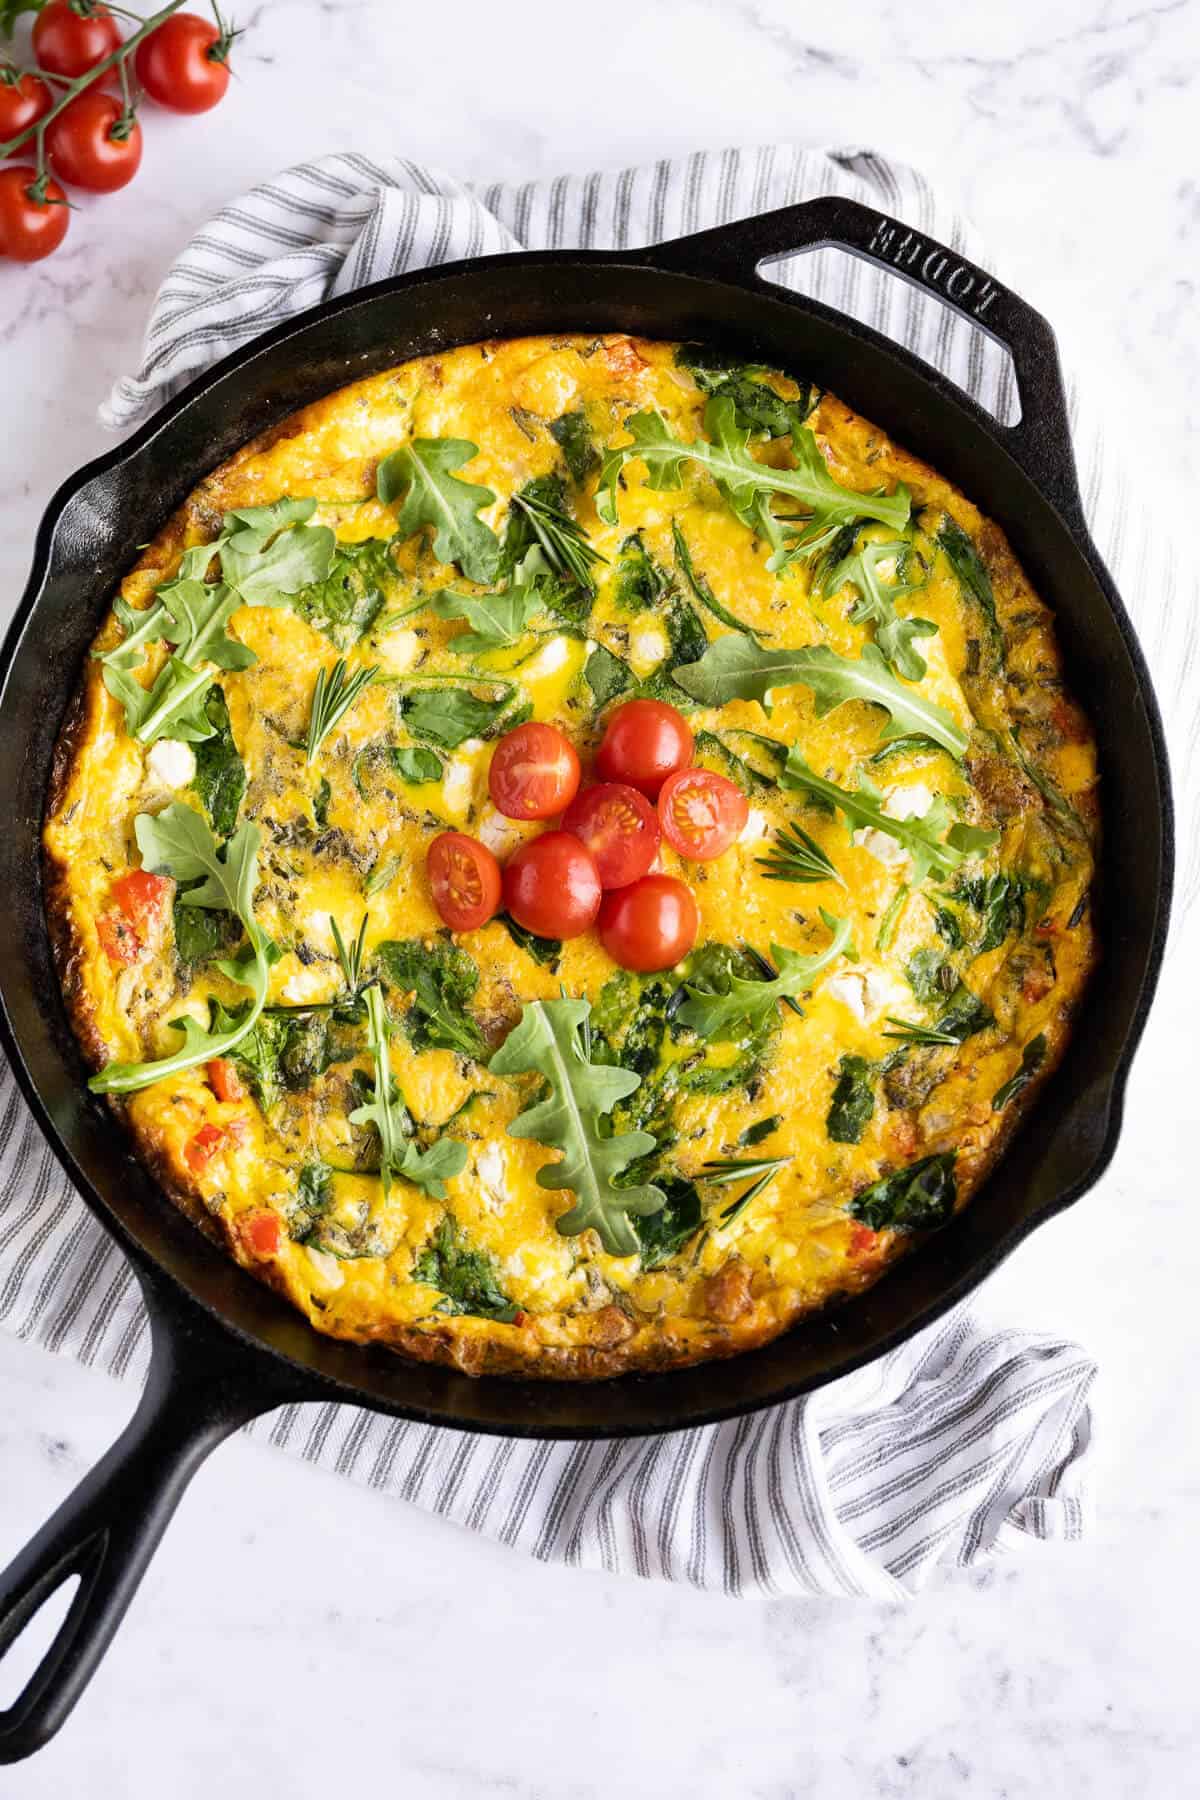 cooked frittata in a cast iron pan garnished with arugula, rosemary, and diced tomatoes